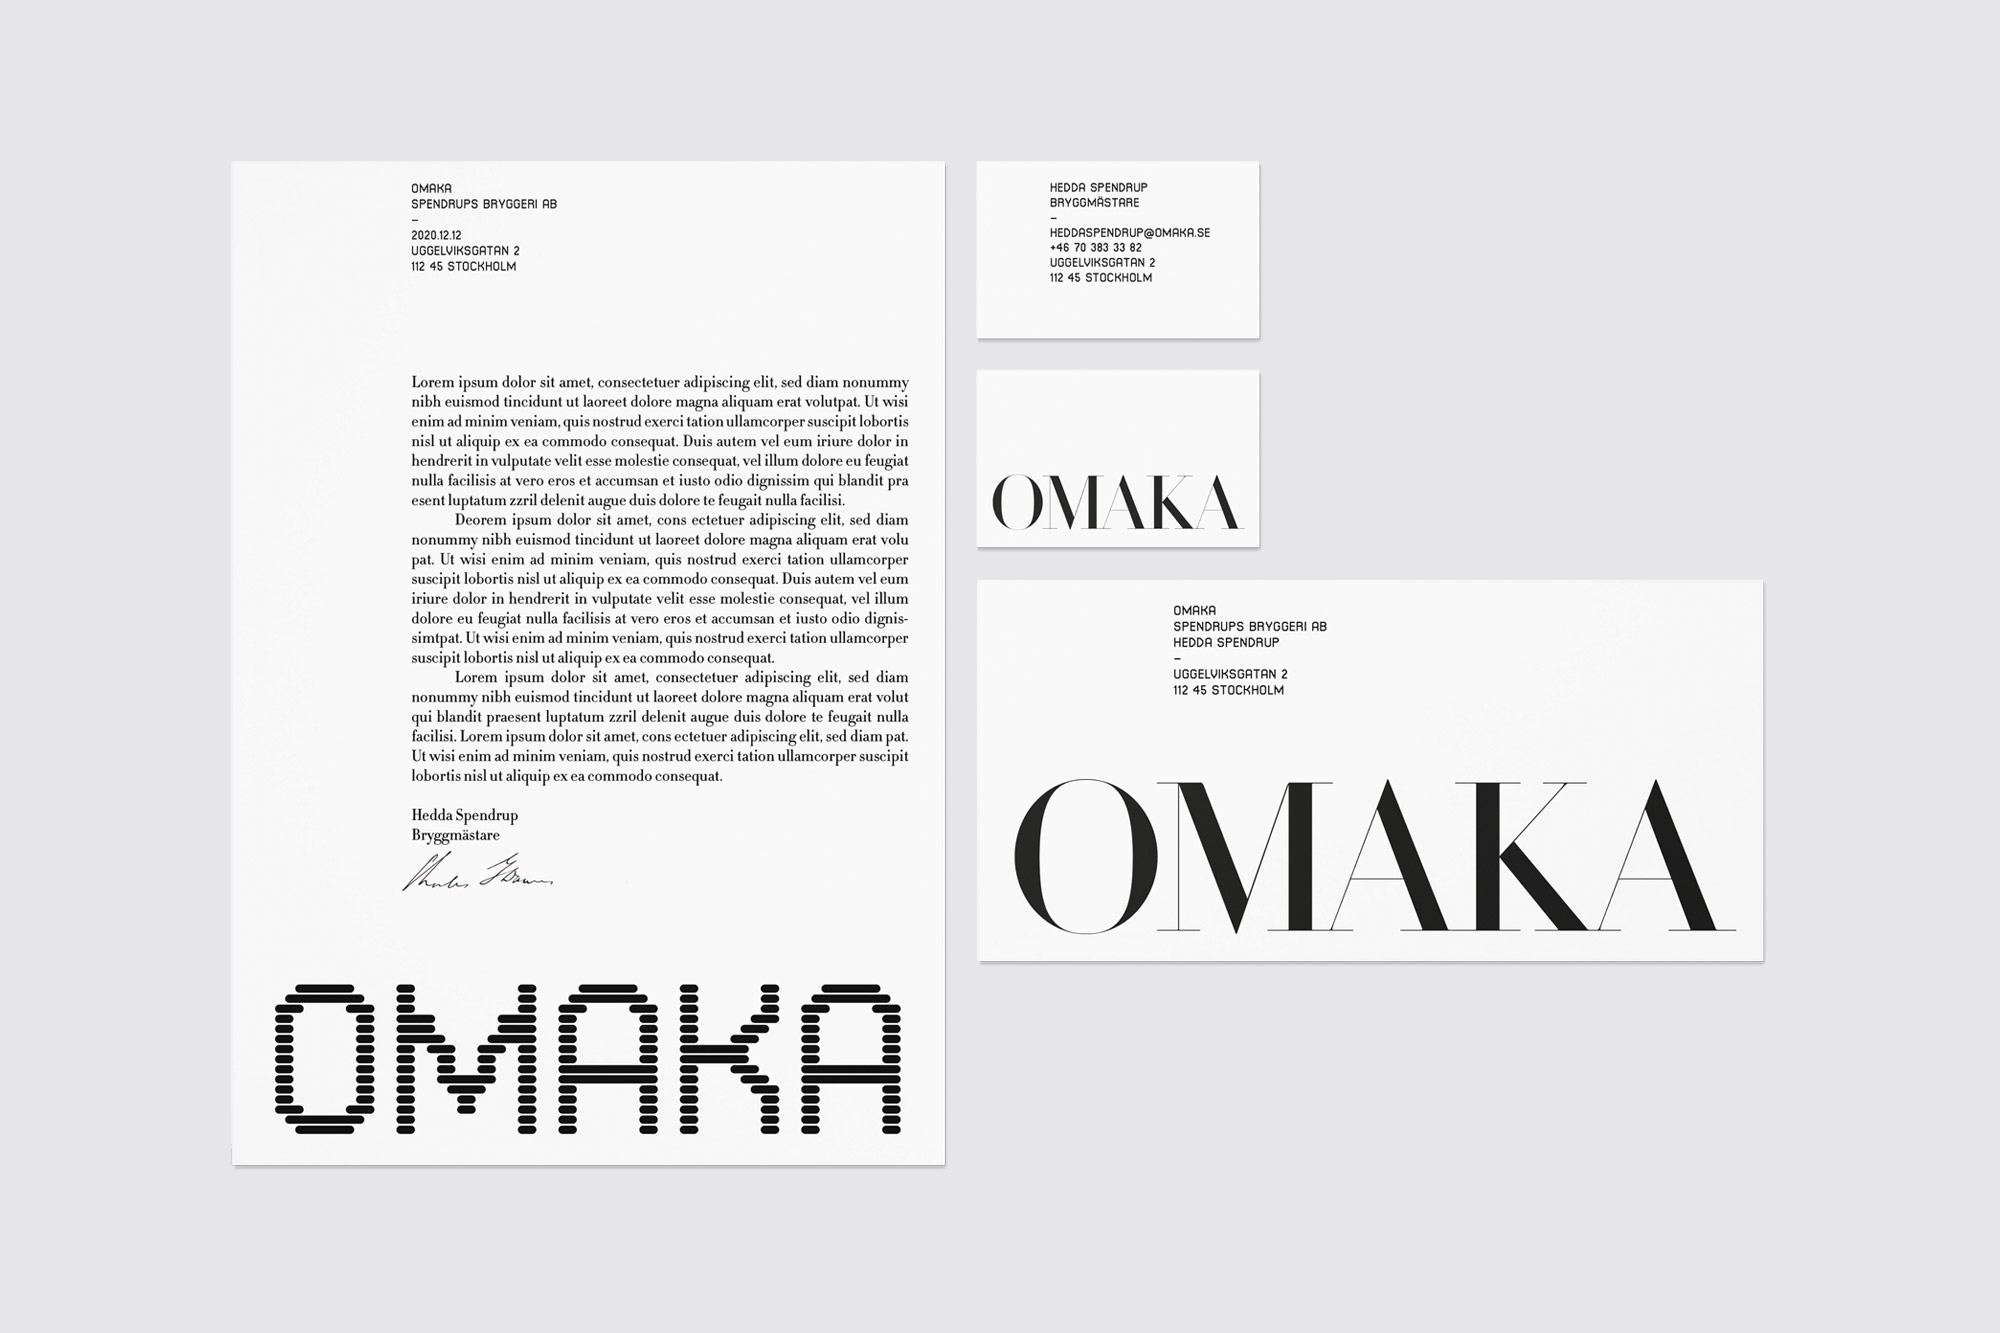 Logo, brand identity and stationery design for Swedish microbrewery Omaka by Stockholm Design Lab